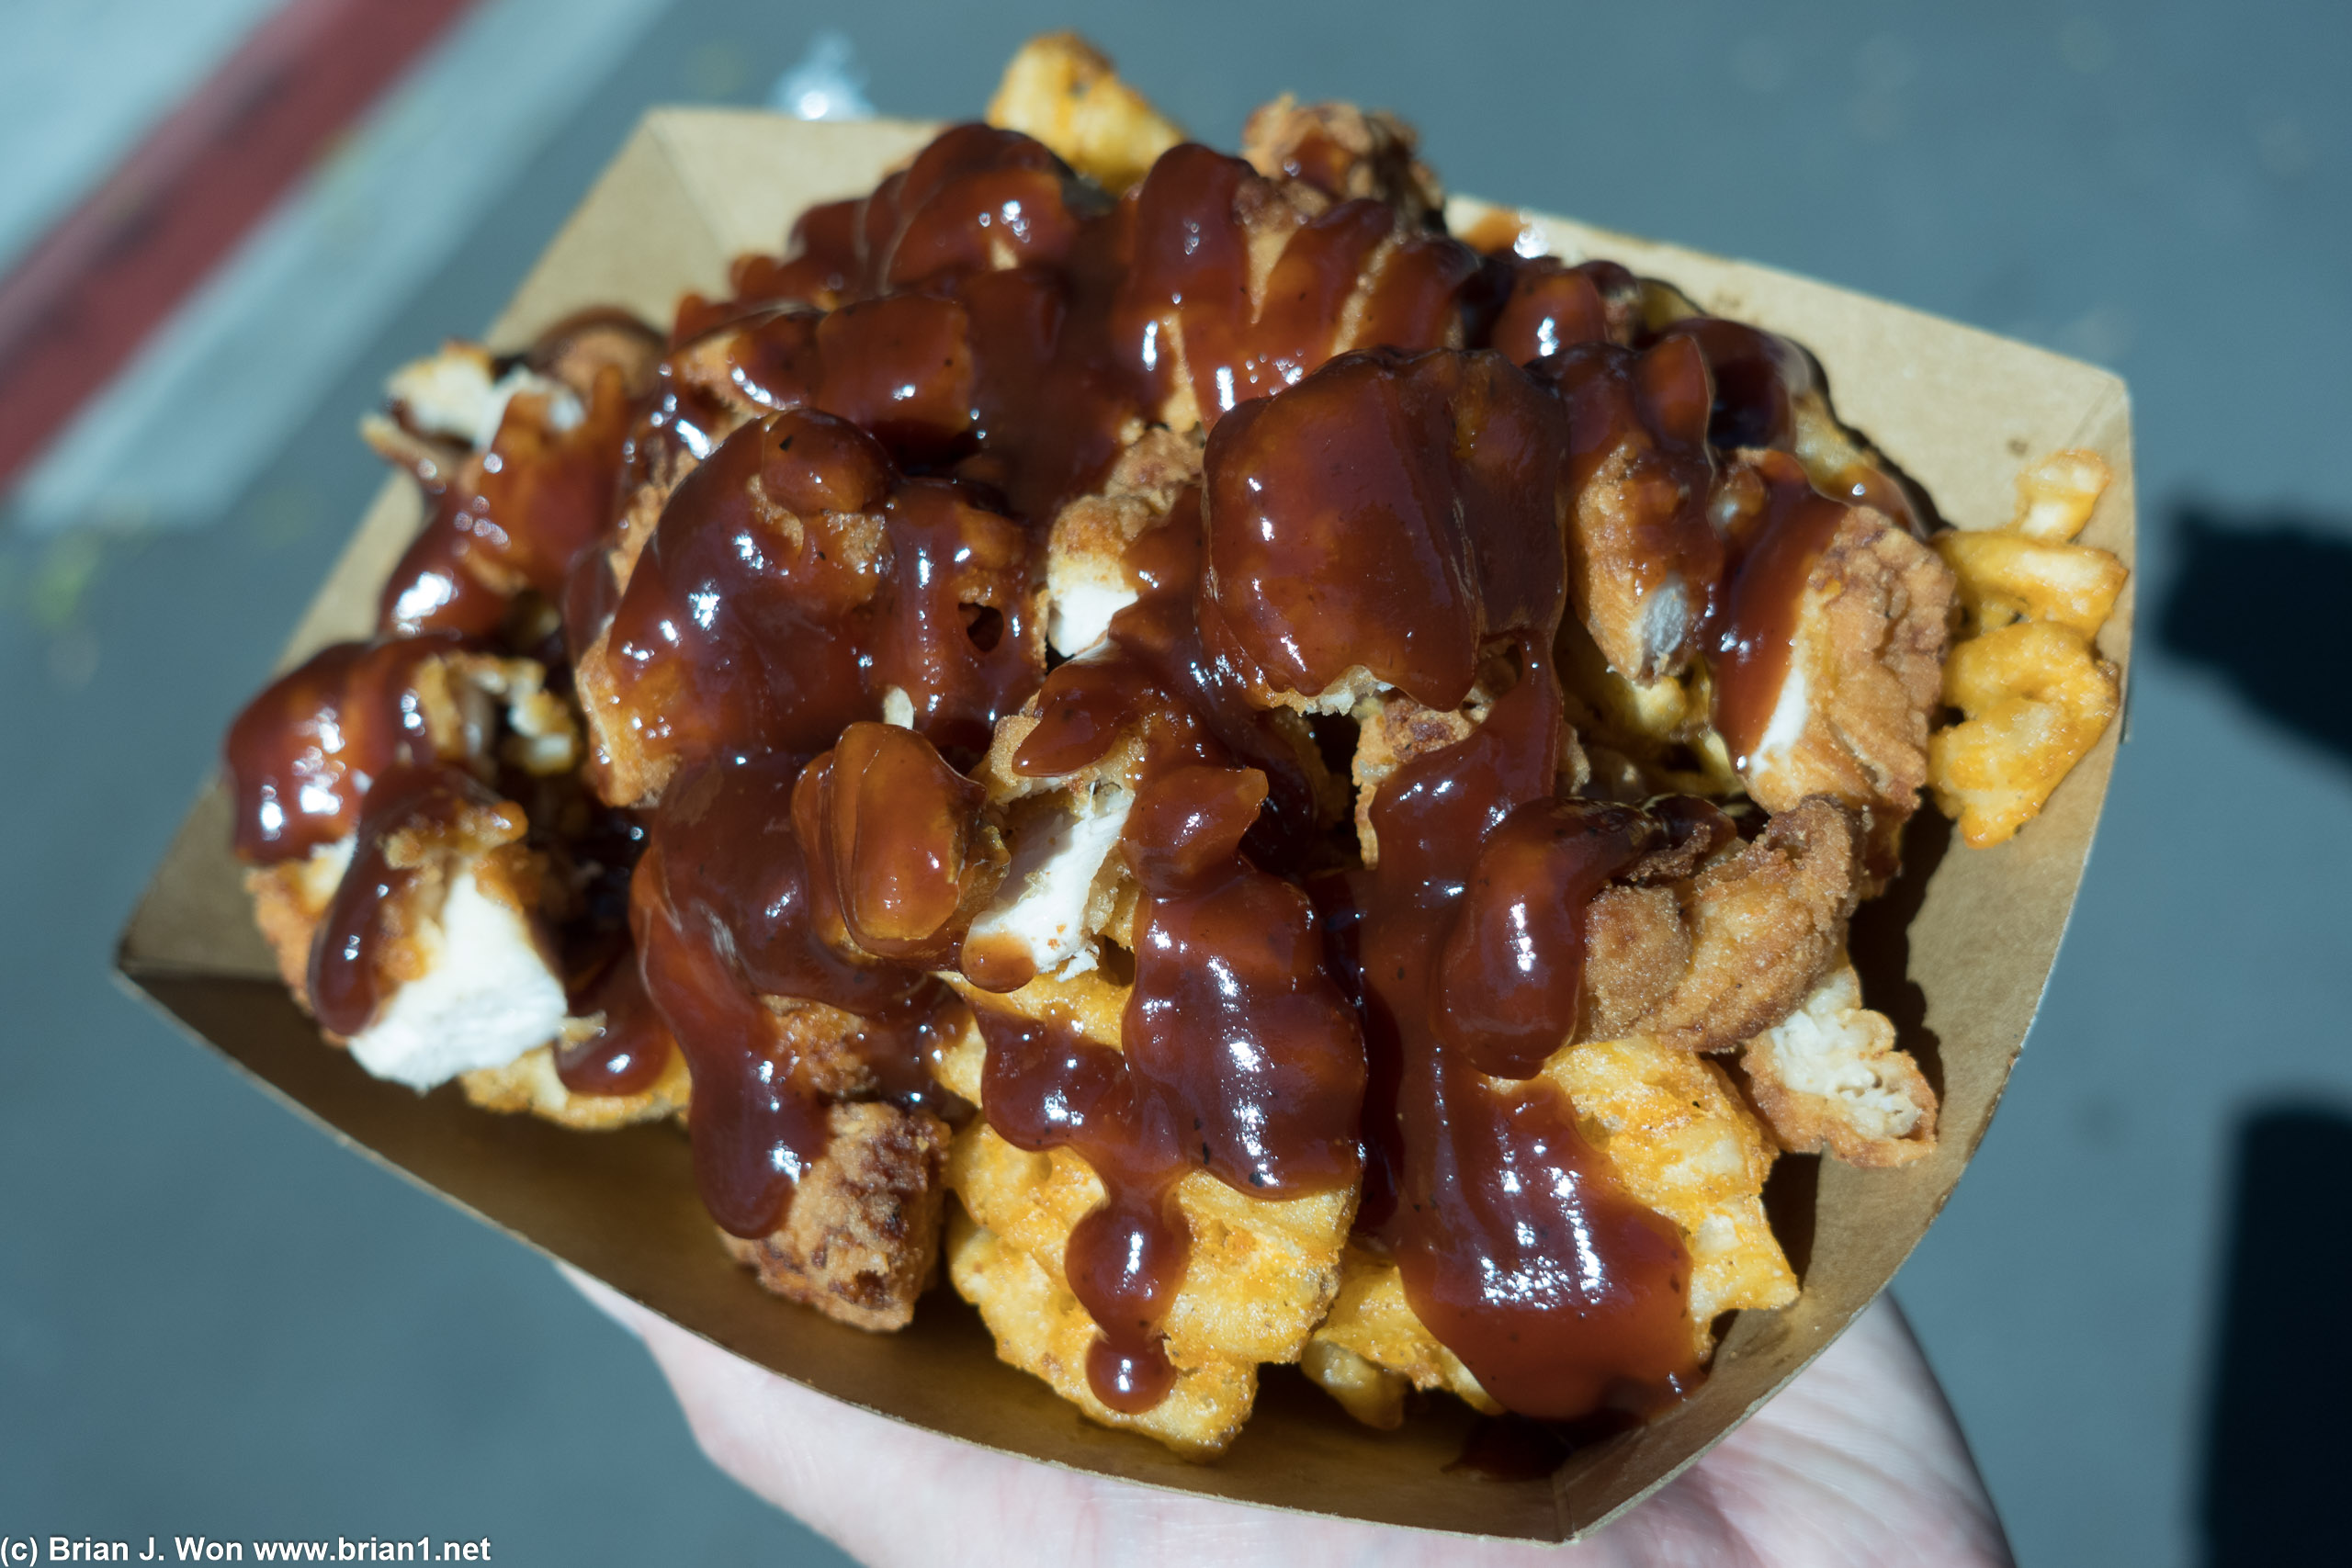 Waffles were a touch over fried, but it was the chicken tenders and BBQ sauce that were very disappointing.